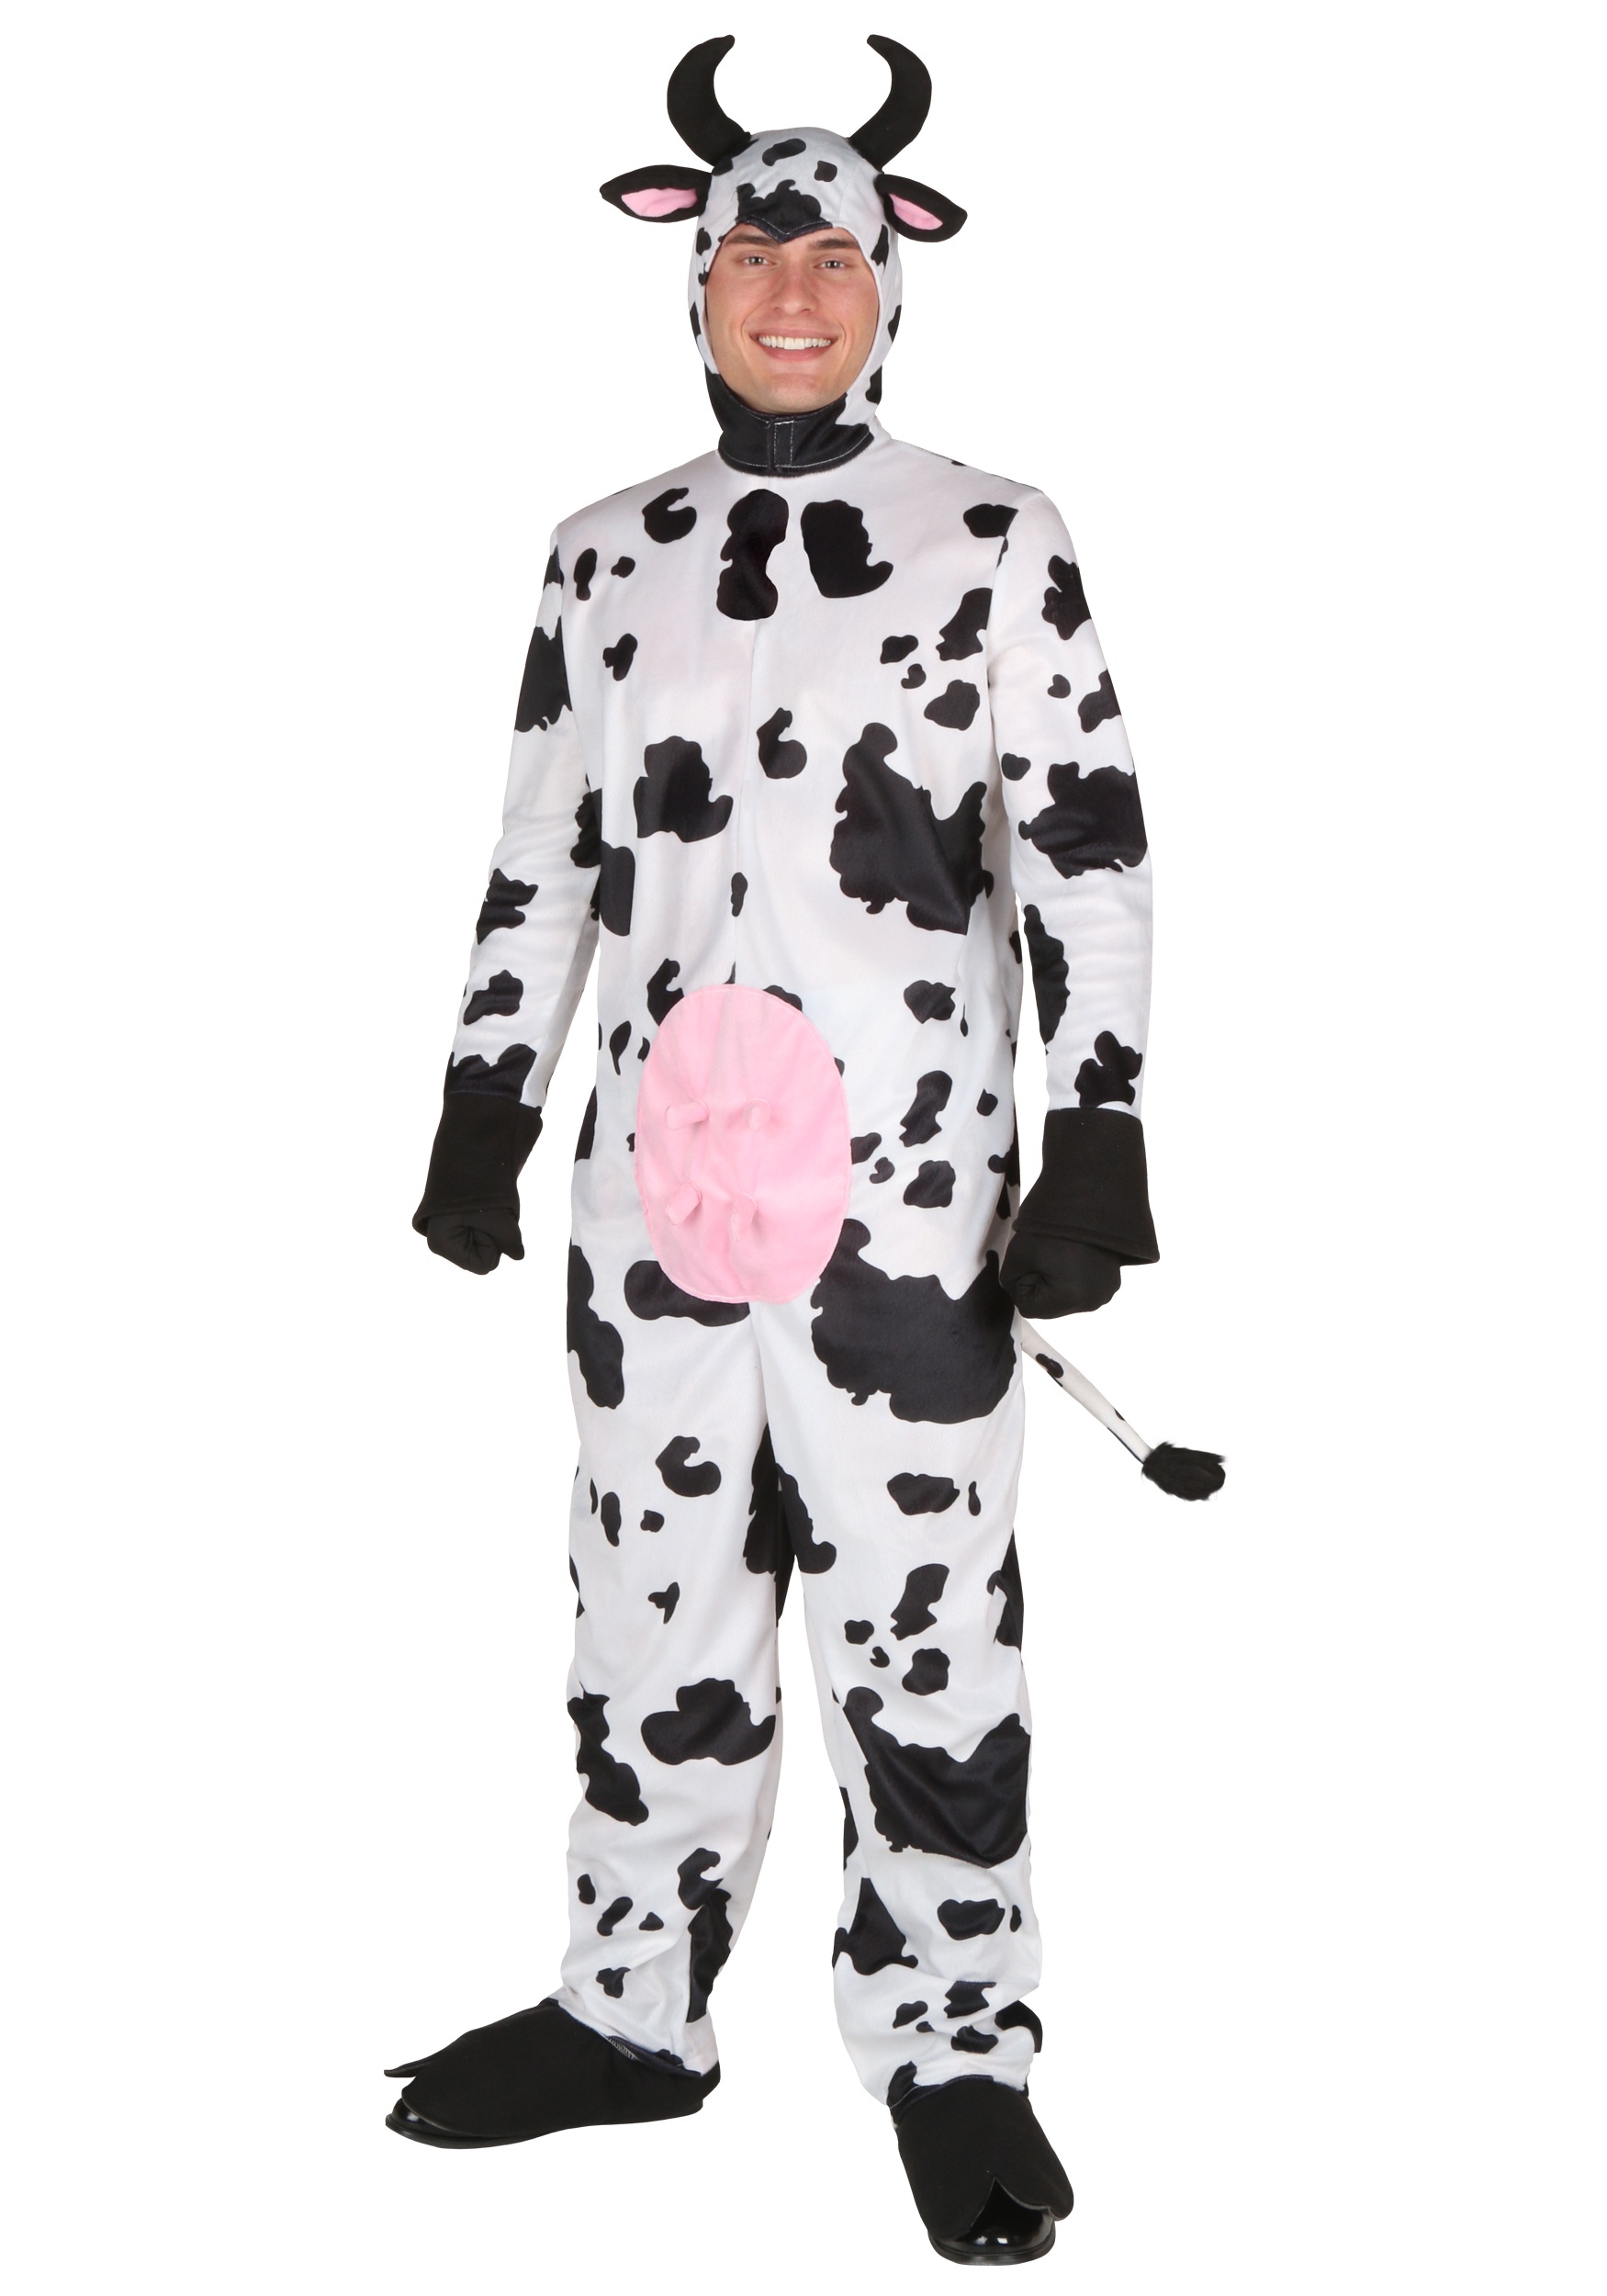 Cow Costume with Free Shipping in U.S., UK, Europe, Canada | Order Plus Siz...